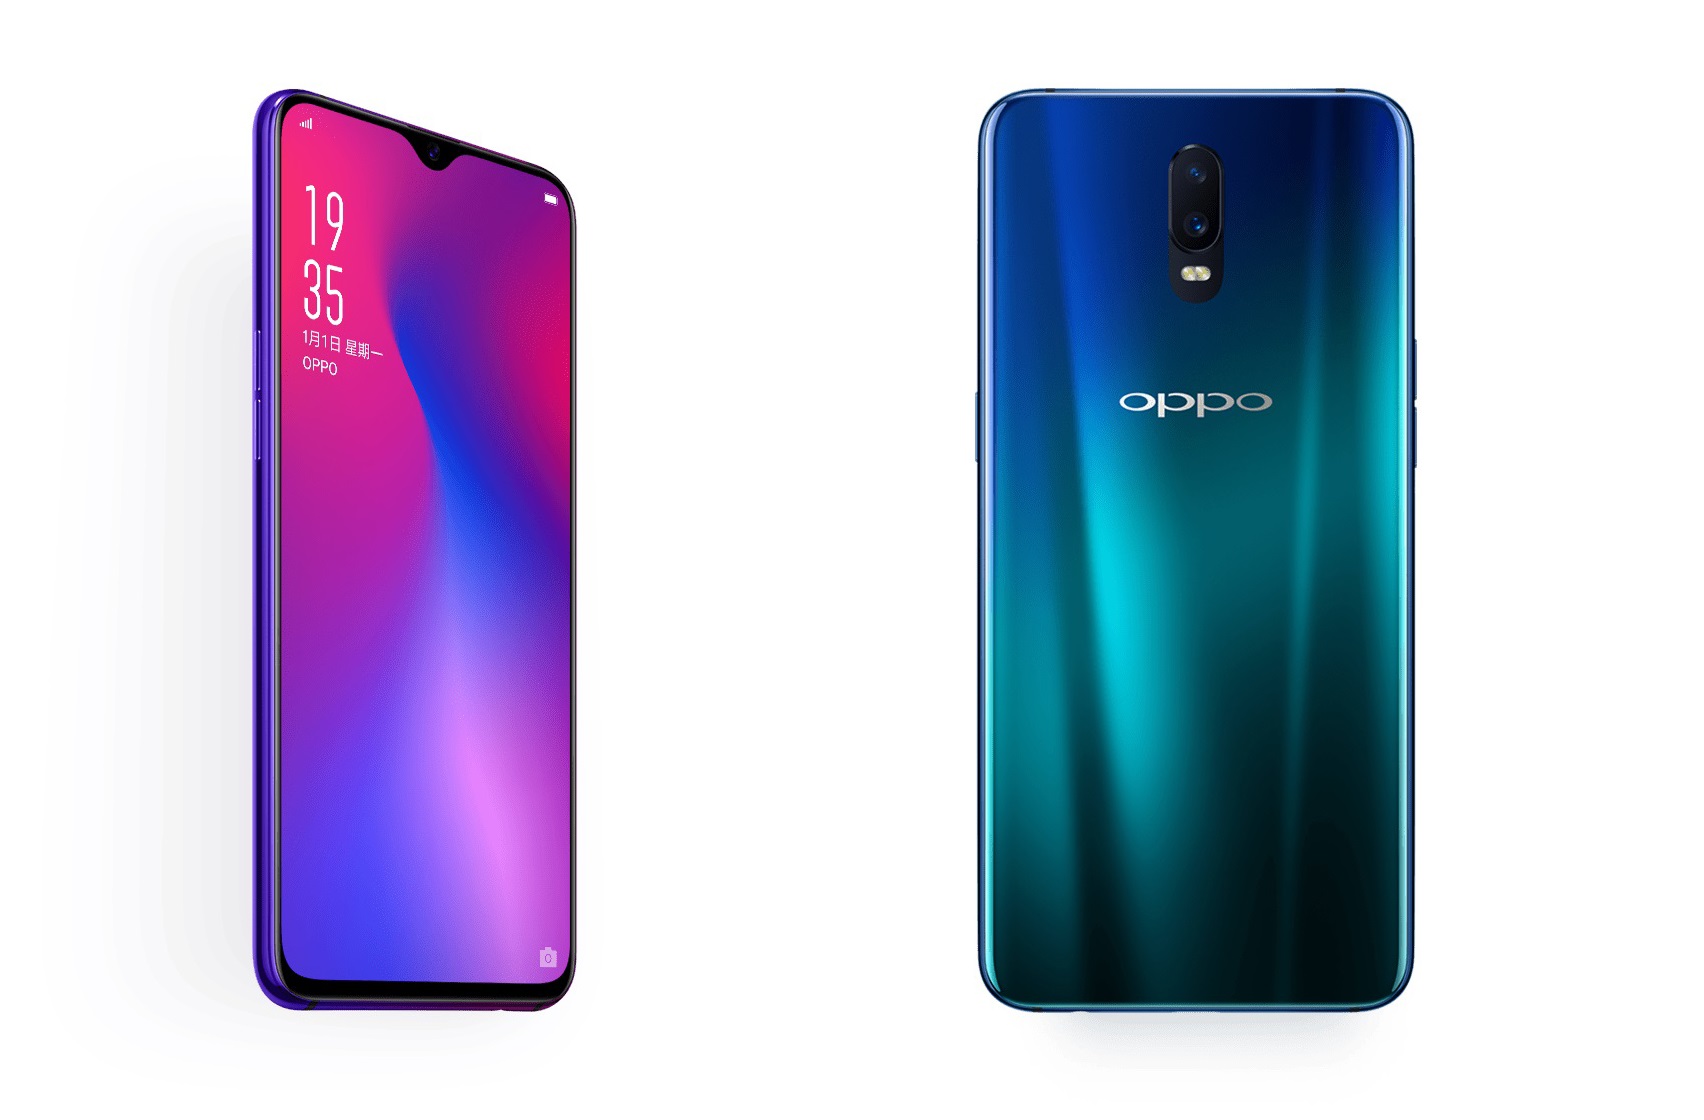 Oppo R17 flagship phone in pink and blue.